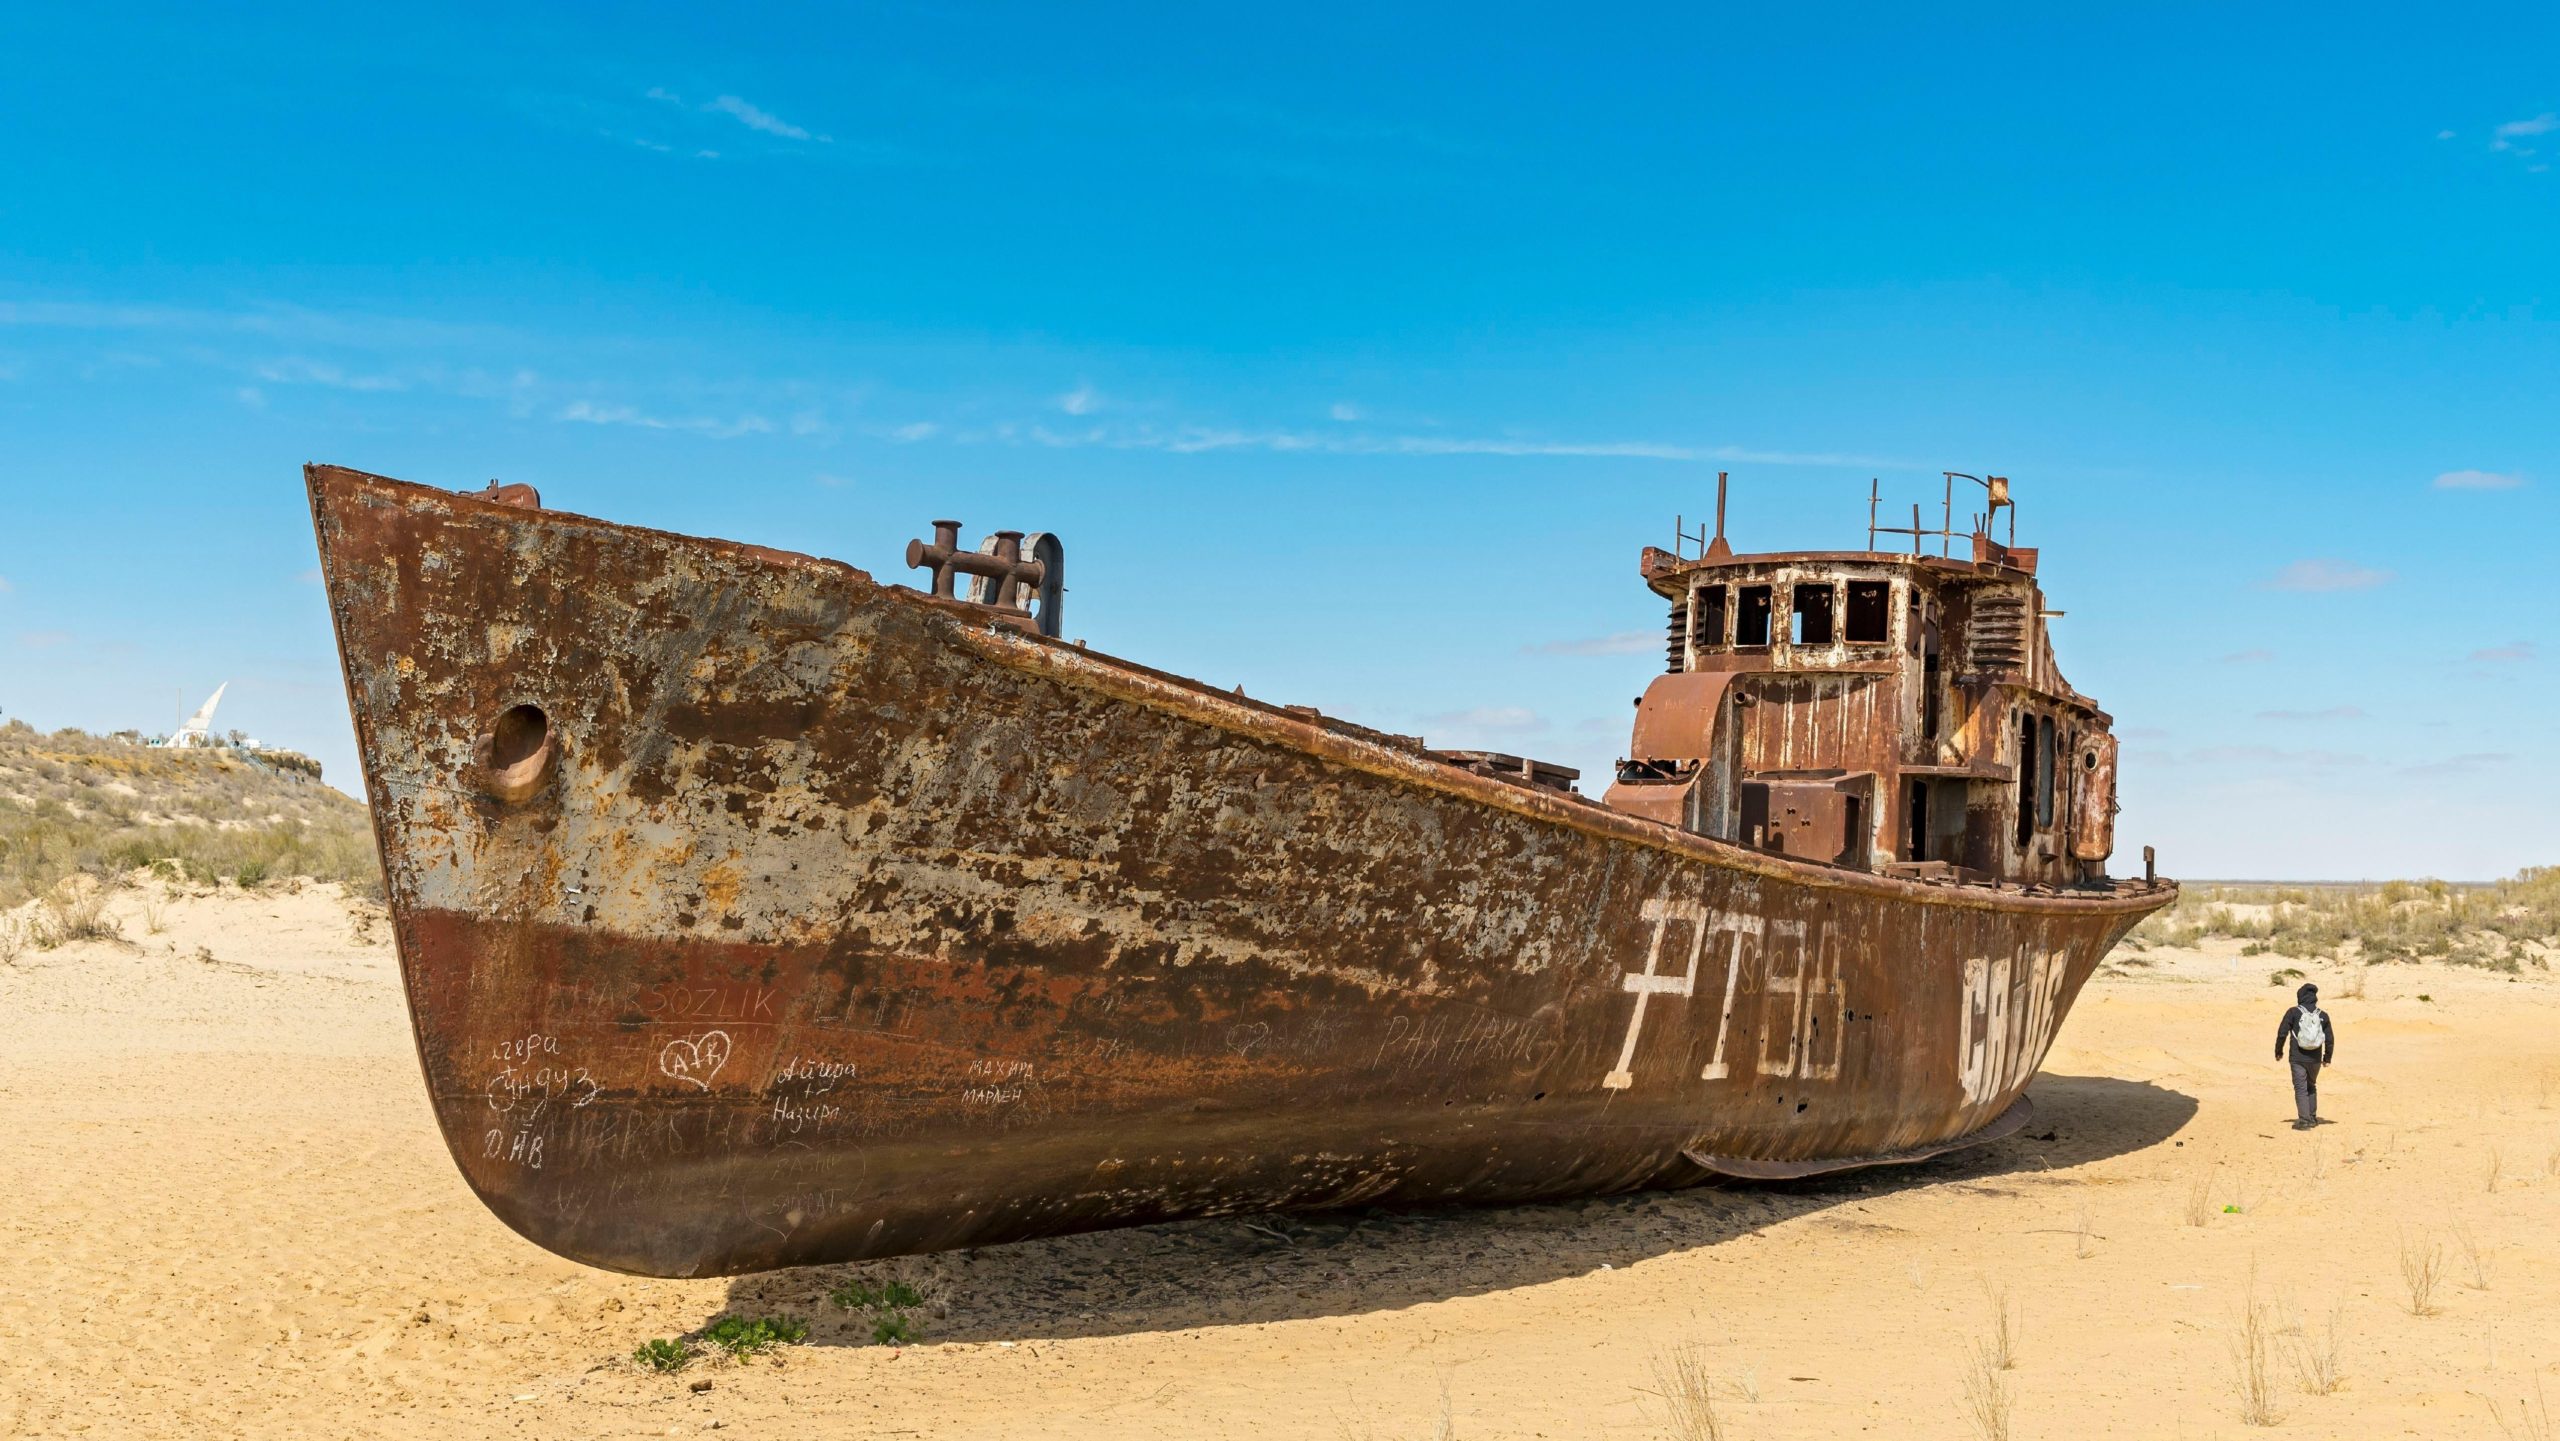 A shipwreck in Moynaq, Uzbekistan, a former port on the Aral Sea. (Photo: Petr Svarc/Education Images/Universal Images Group, Getty Images)